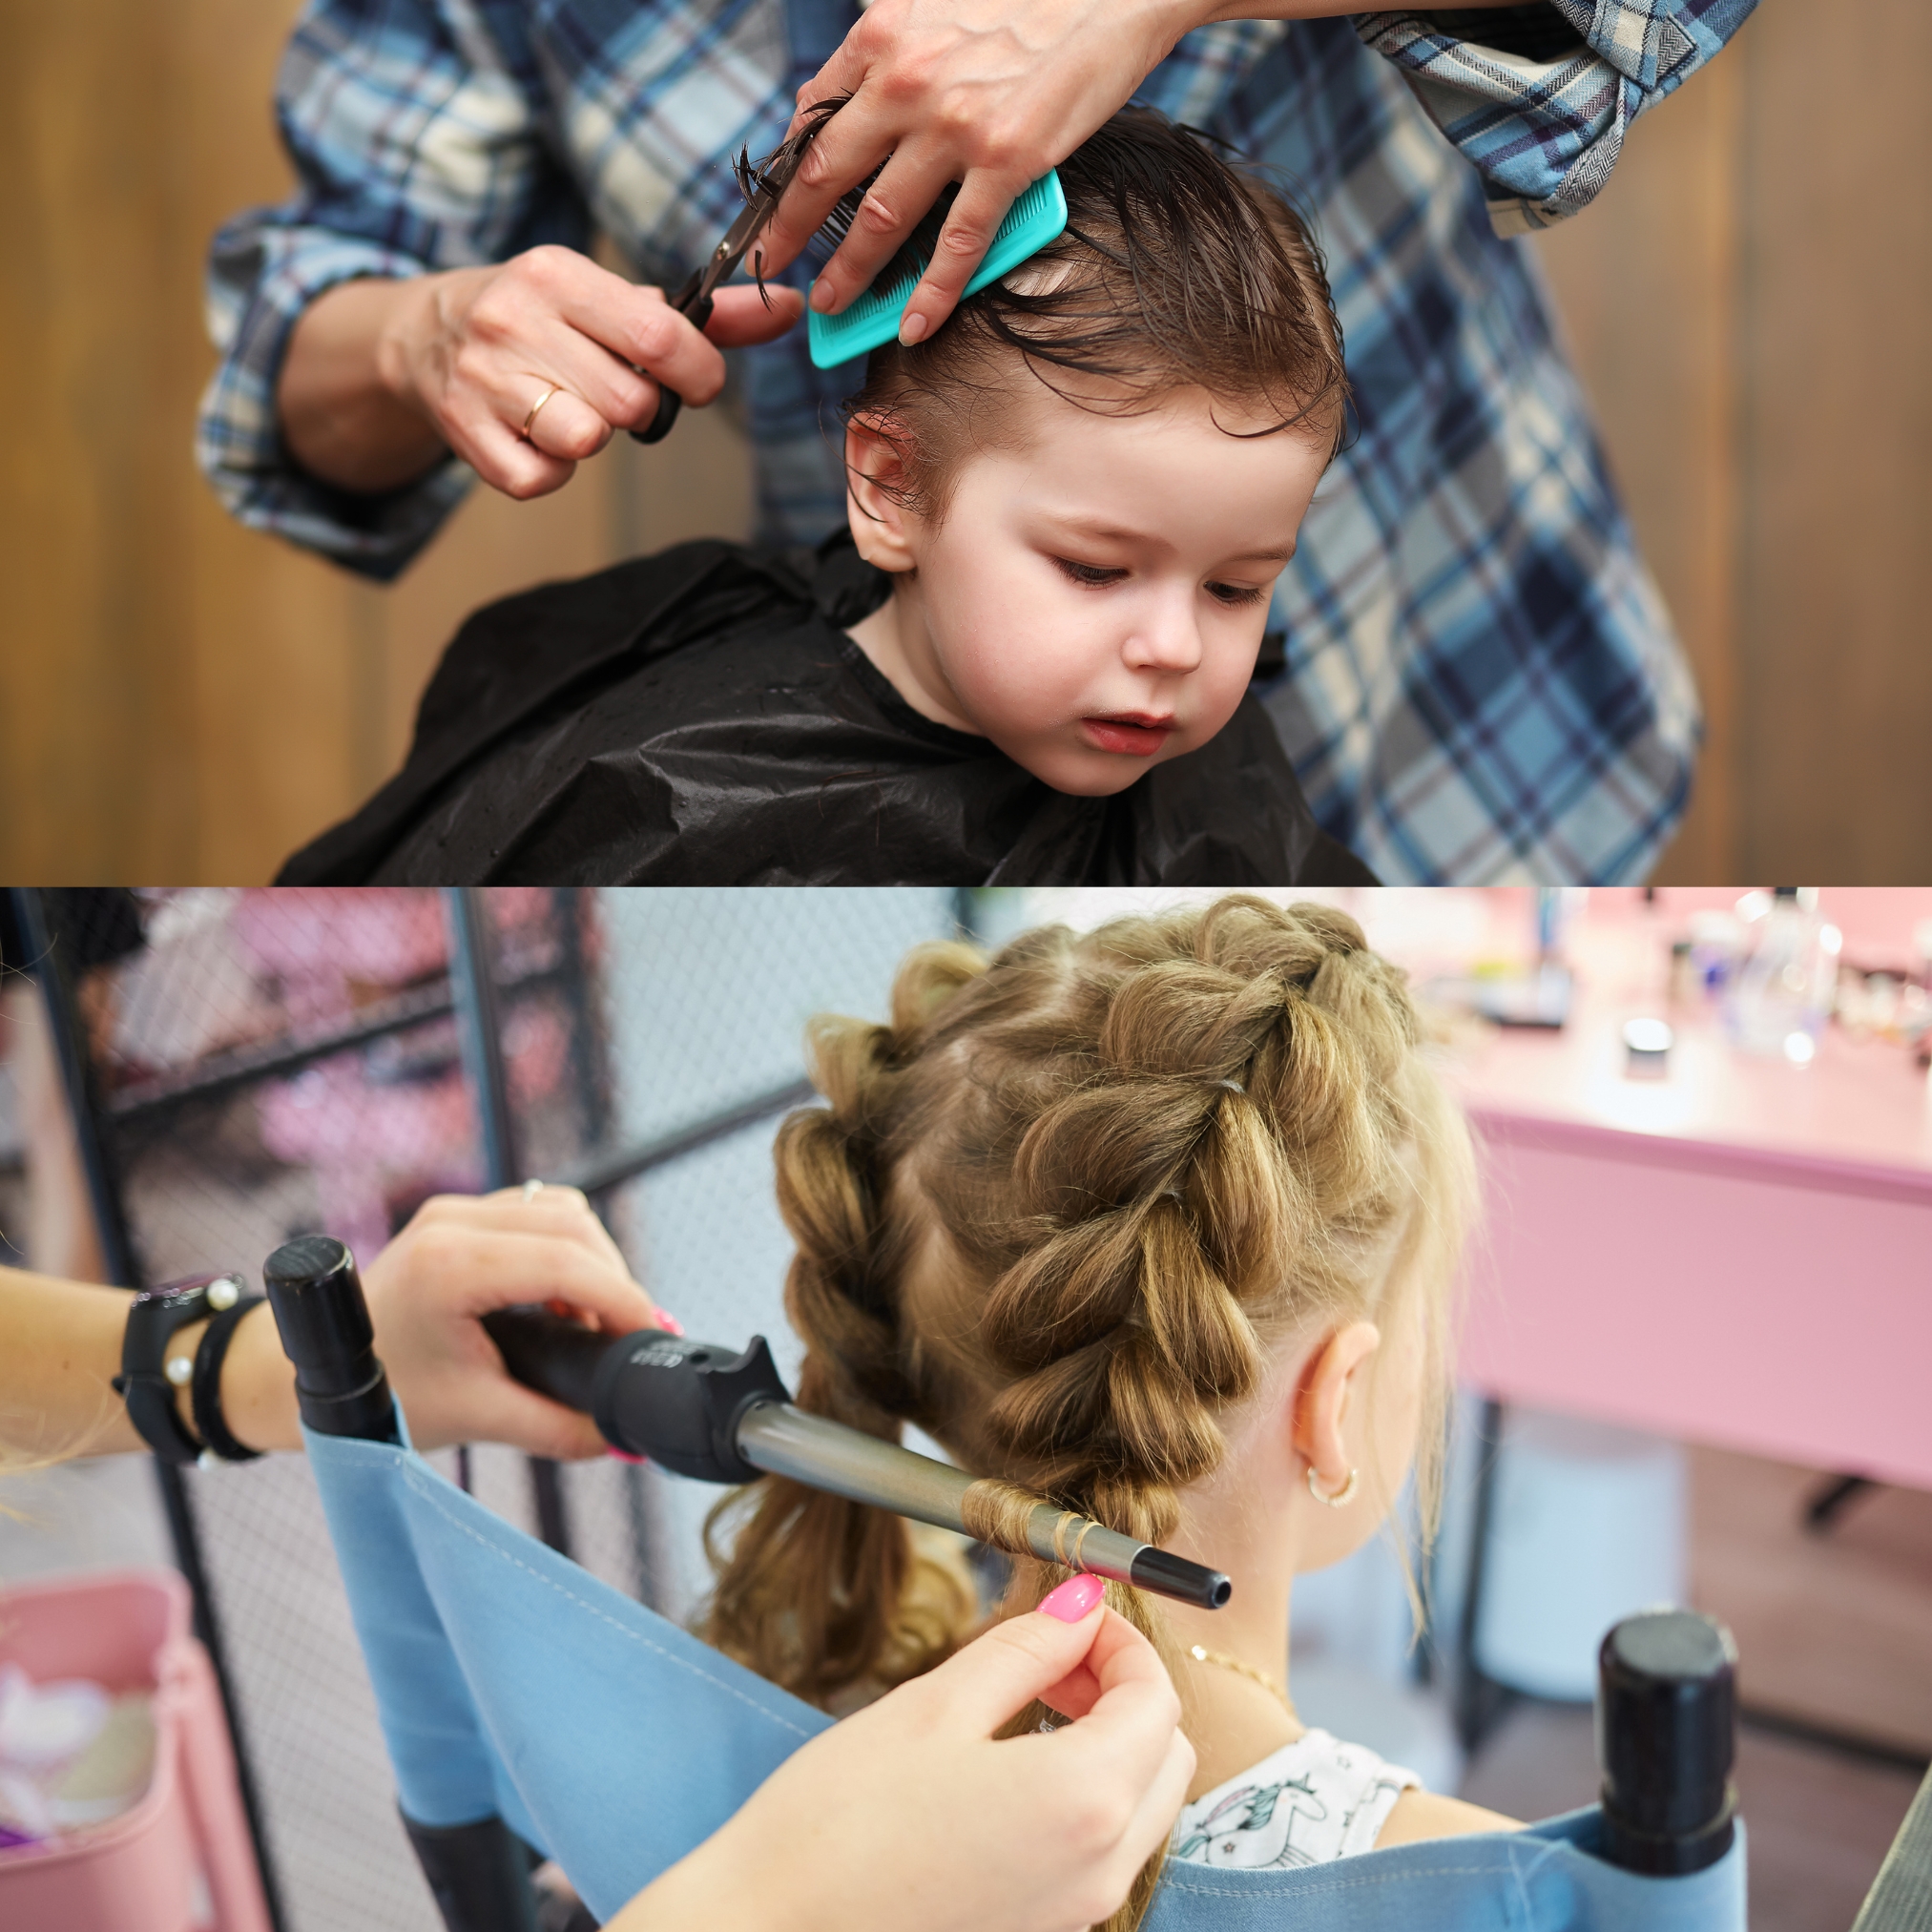 Kids hair style: Where Style Meets Childhood